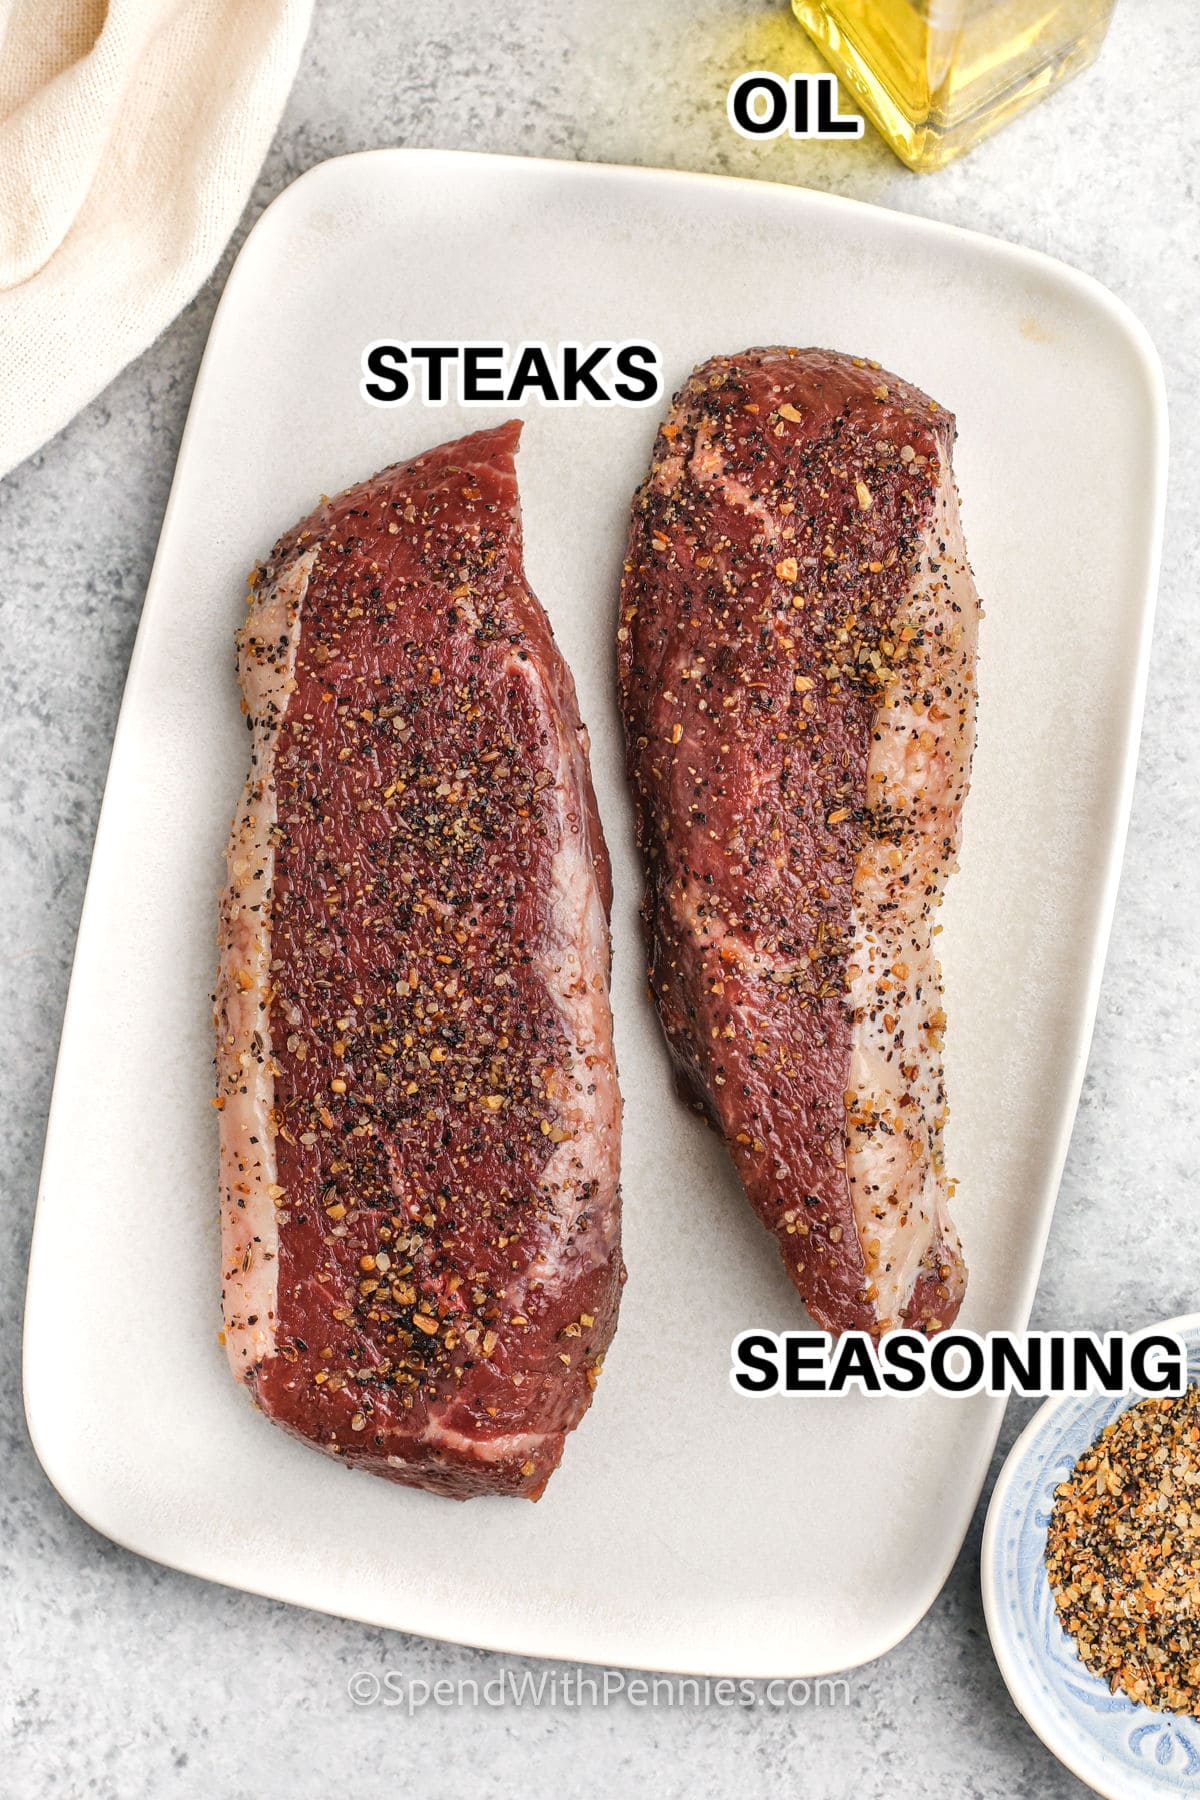 steaks , seasoning and oil to make Grilled Sirloin Steak with labels